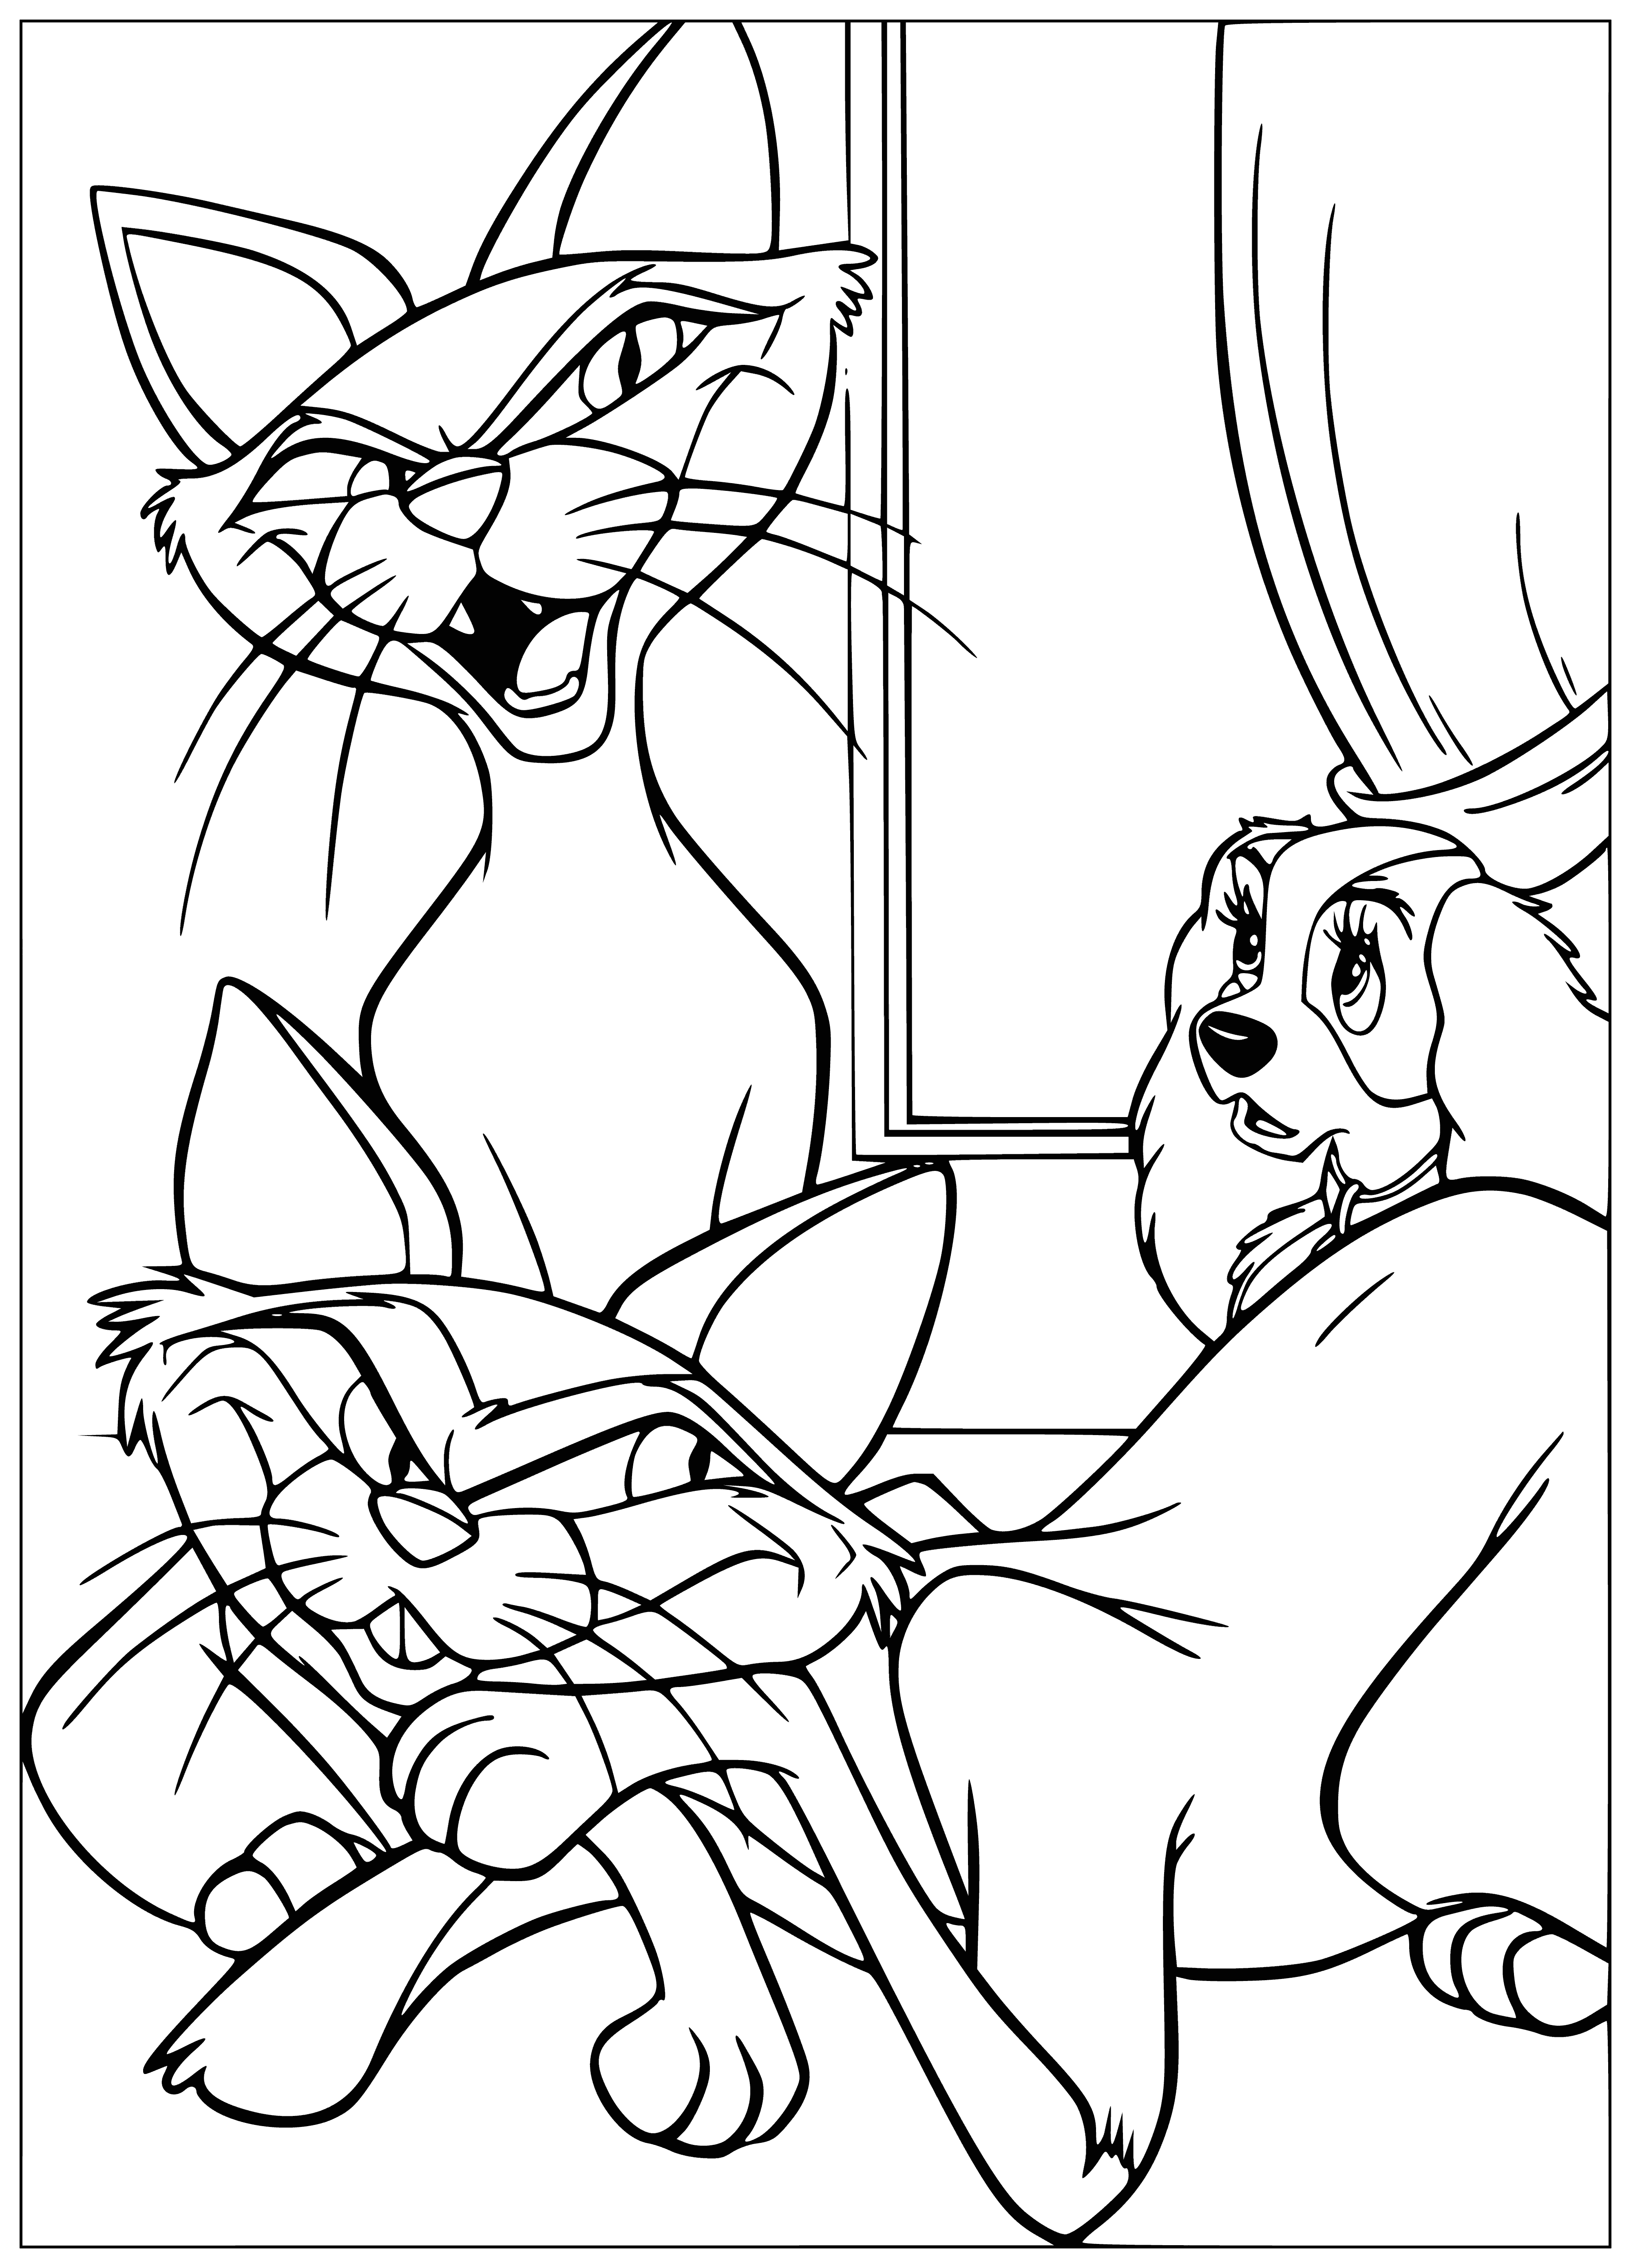 coloring page: #coloringpages #catthemepic.twitter.com/c5zMN7h6ZC

Two cats have a conversation while sitting on a stool and table. #coloringpages #catthemepic.twitter.com/c5zMN7h6ZC